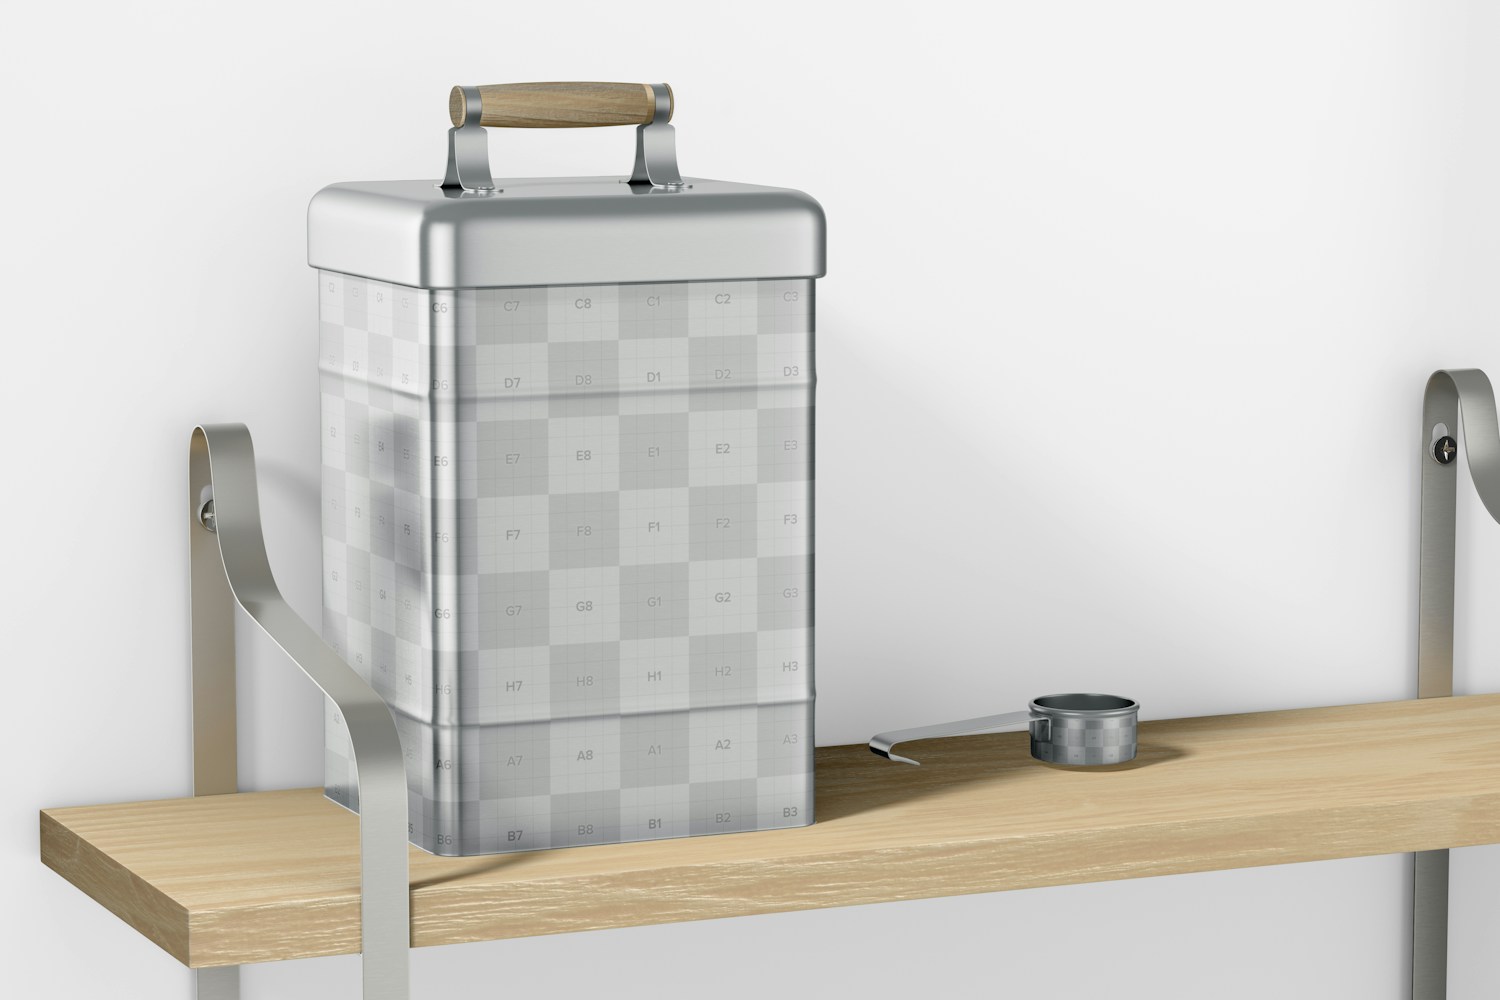 Laundry Detergent Container Mockup, on Shelf